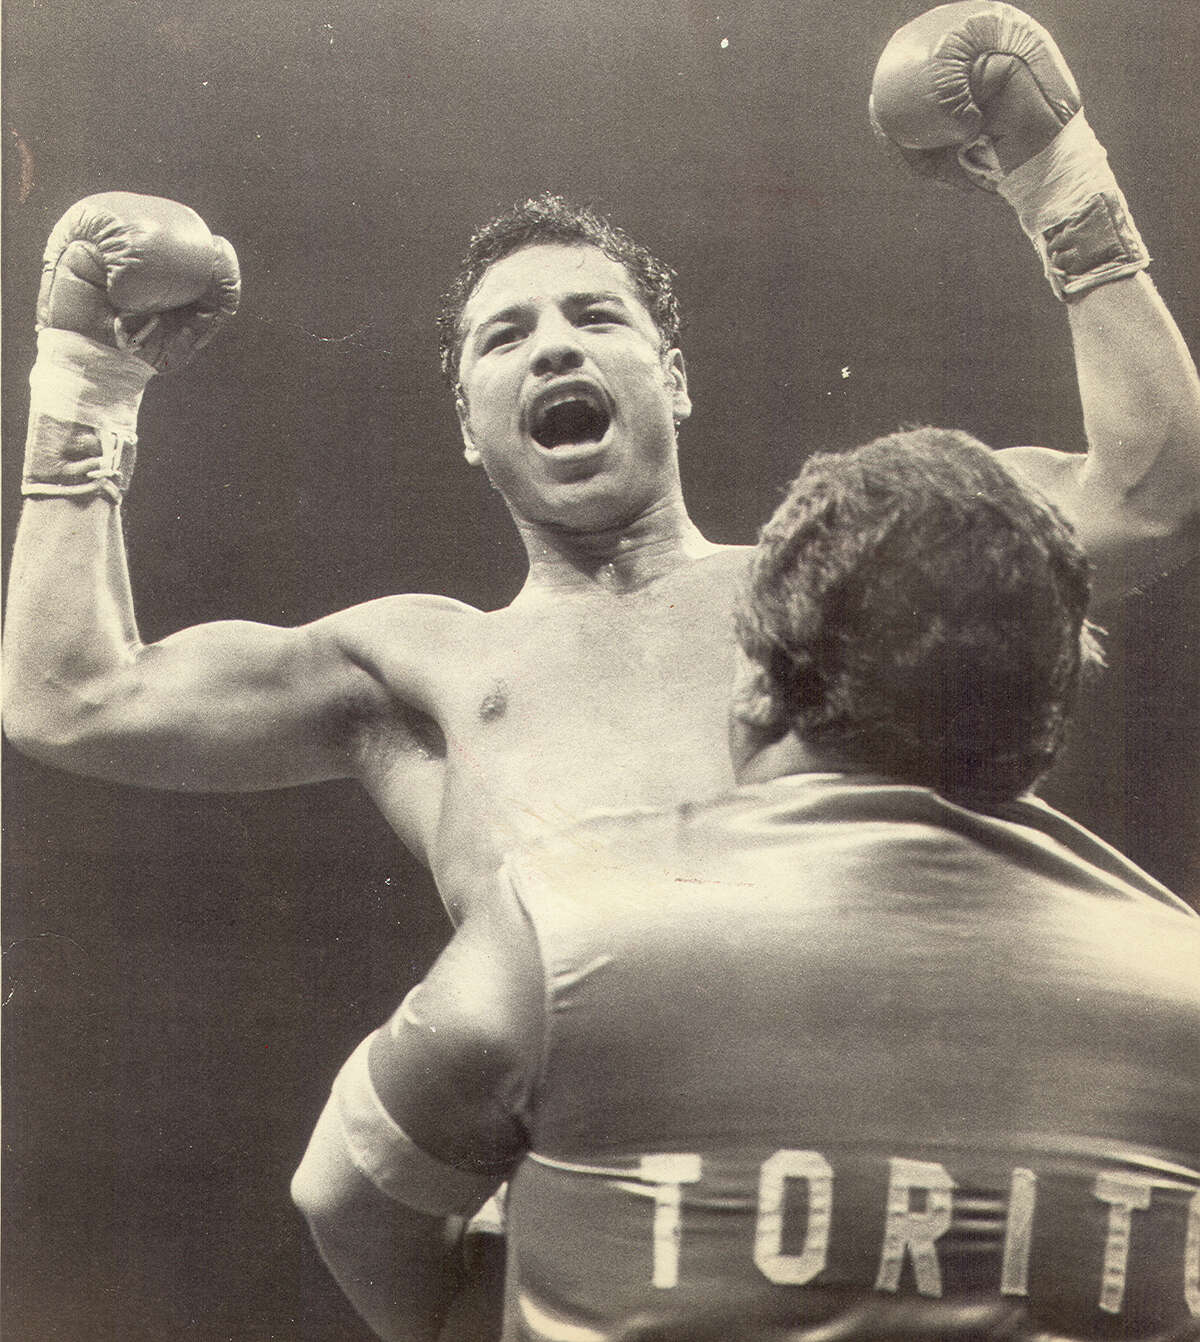 Tony Ayala Jr. is lifted up by his father Tony Ayala Sr. after a 1982 fight.